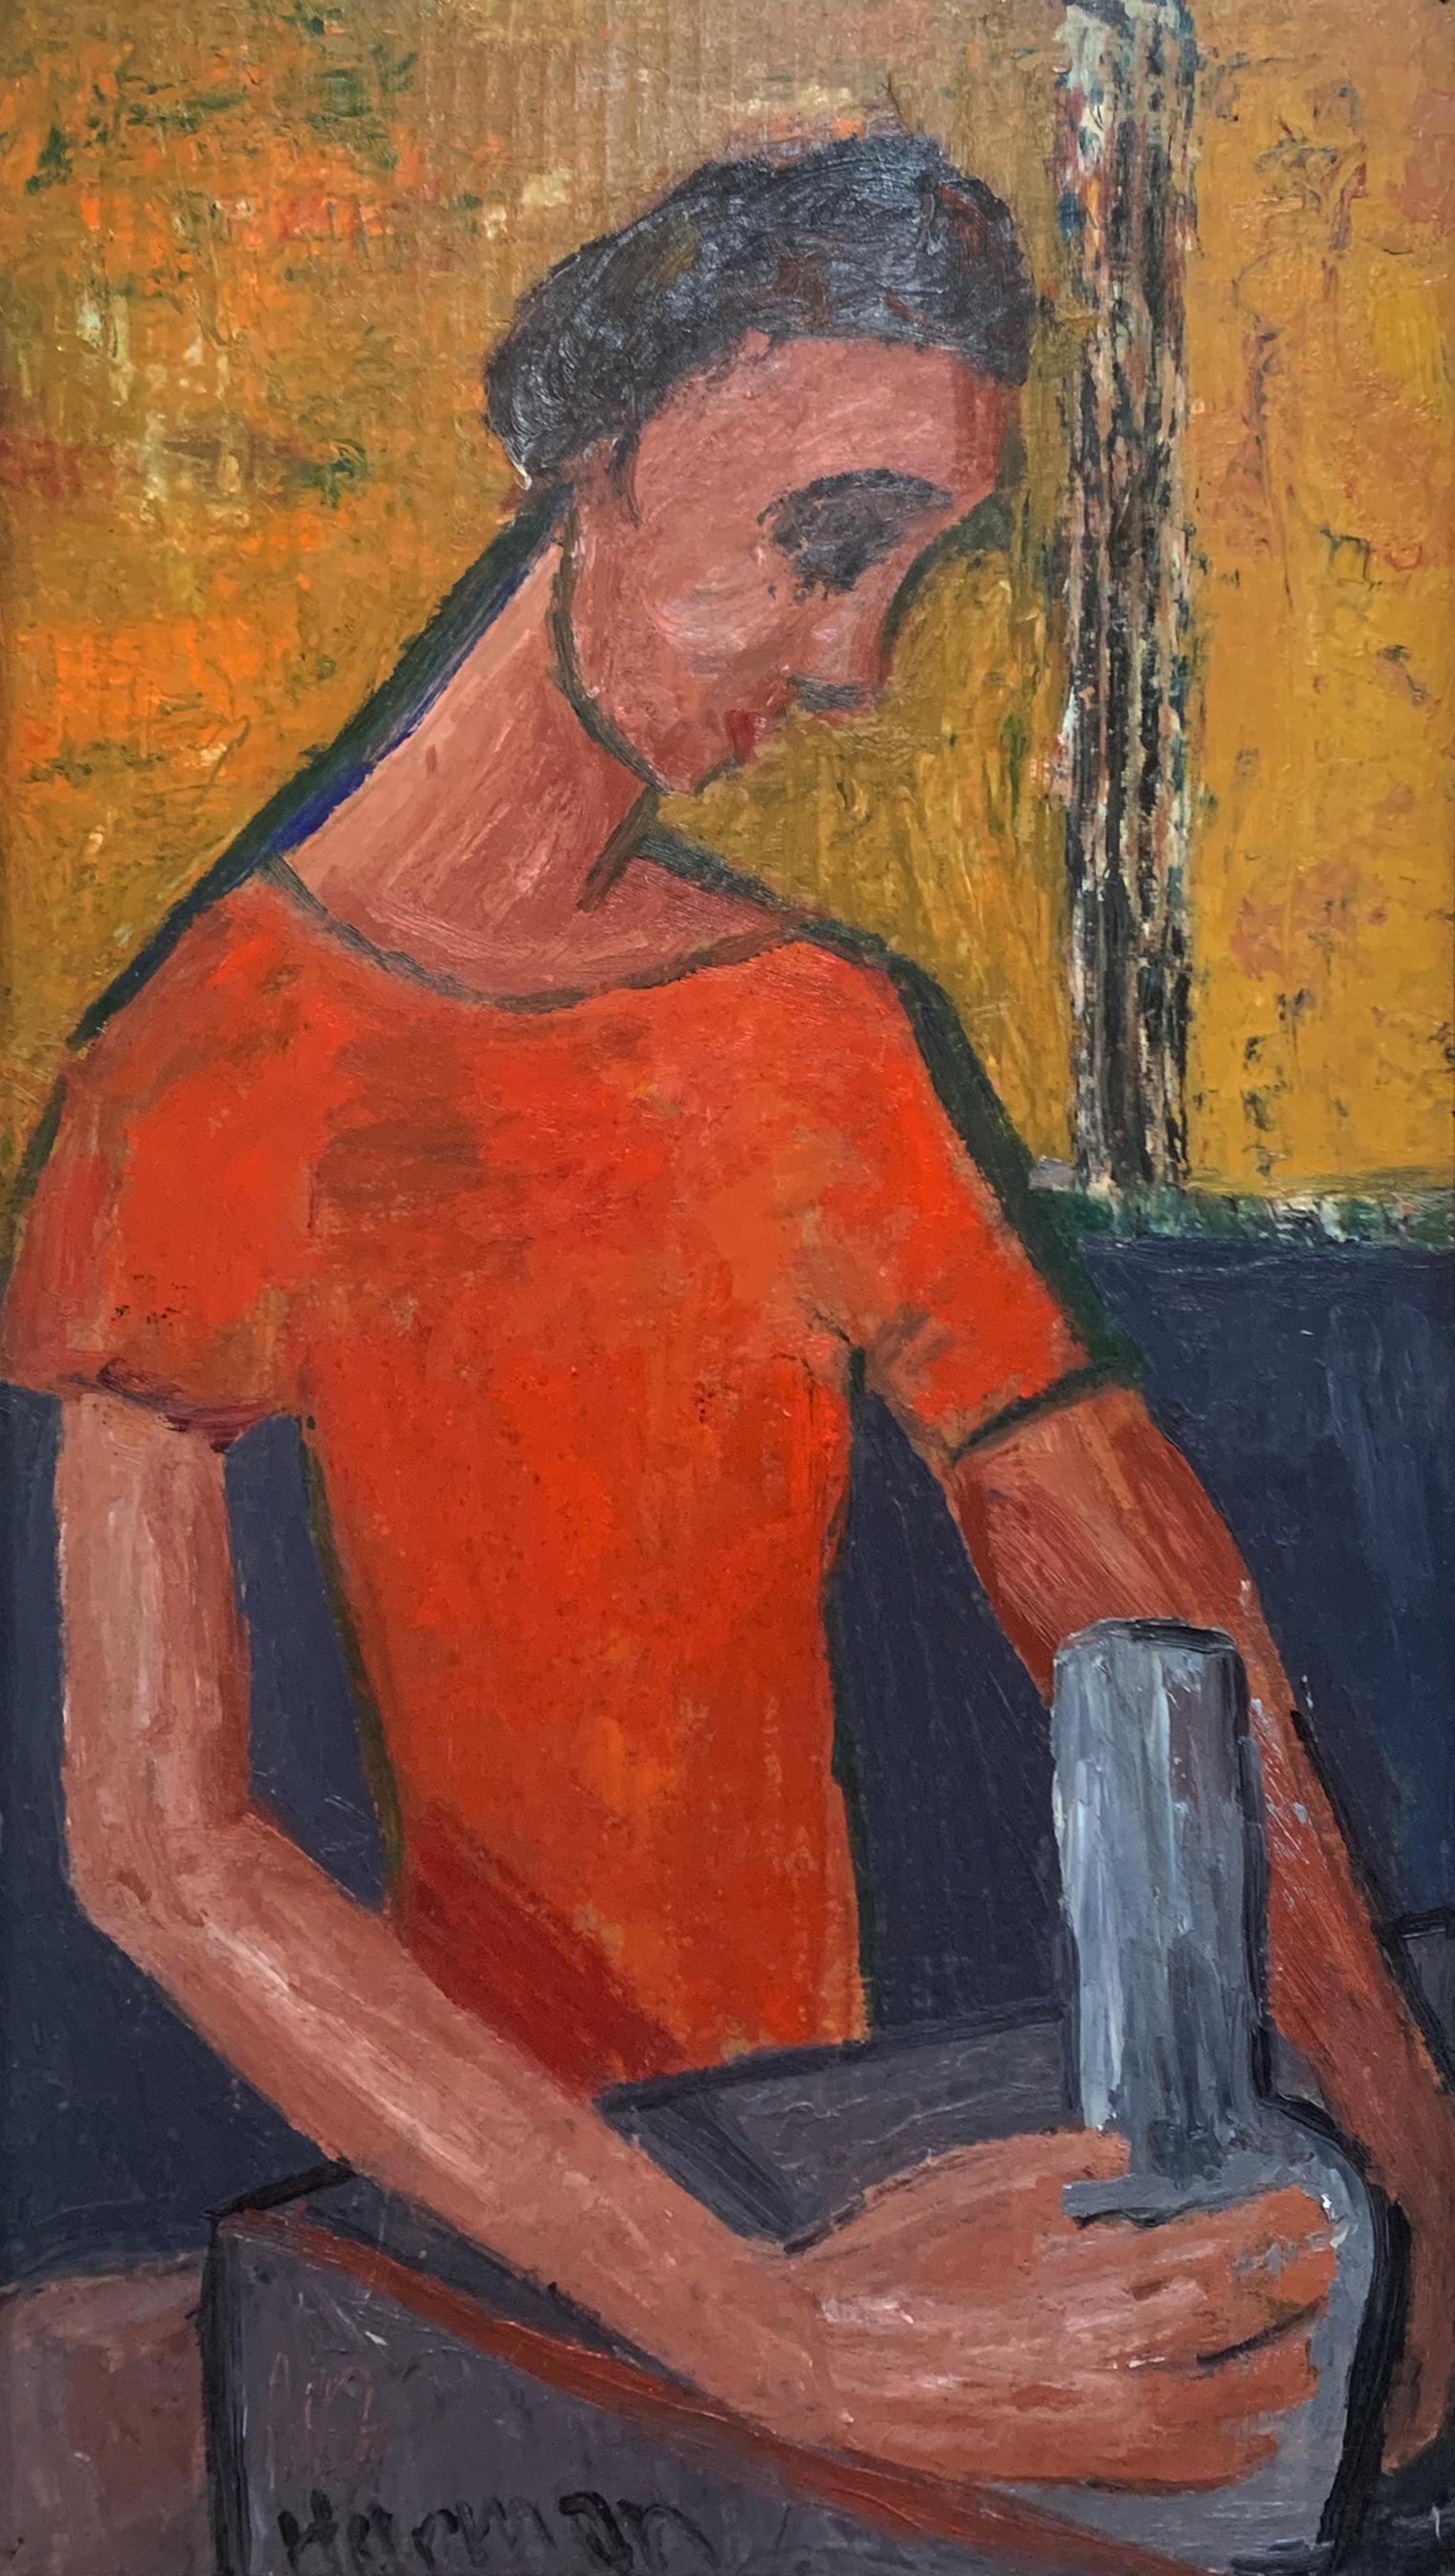 The Potter, Expressionist Portrait of a Young Man by Philadelphia Artist - Painting by Bernard Harmon